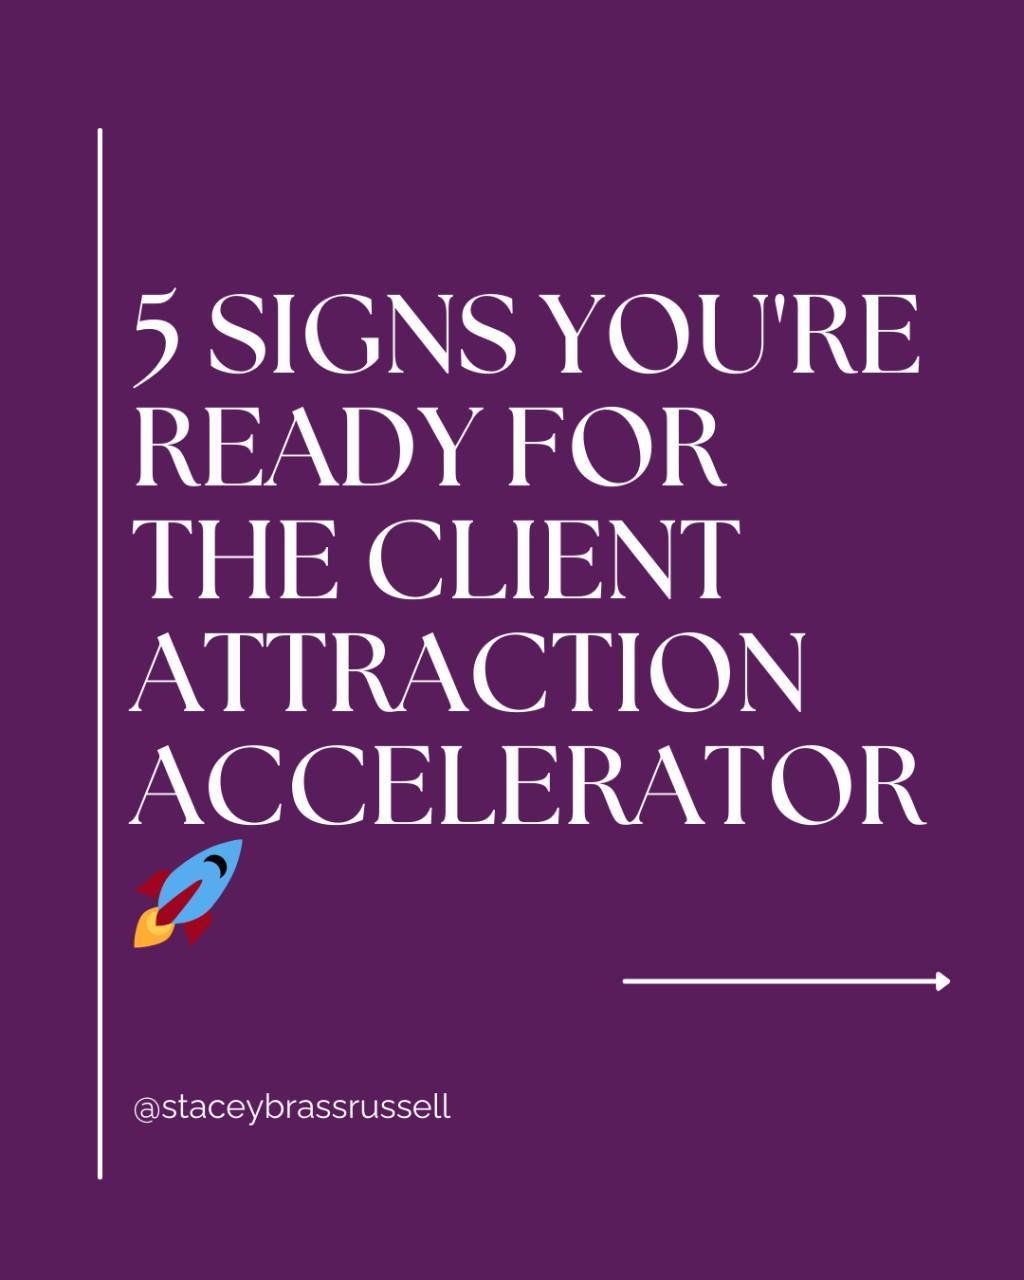 If you're nodding your head to any (or all!) of these signs, then I have some exciting news for you. 🎉

The Client Attraction Accelerator is now open for enrollment, and it's specifically designed for coaches like you who are ready to take their bus